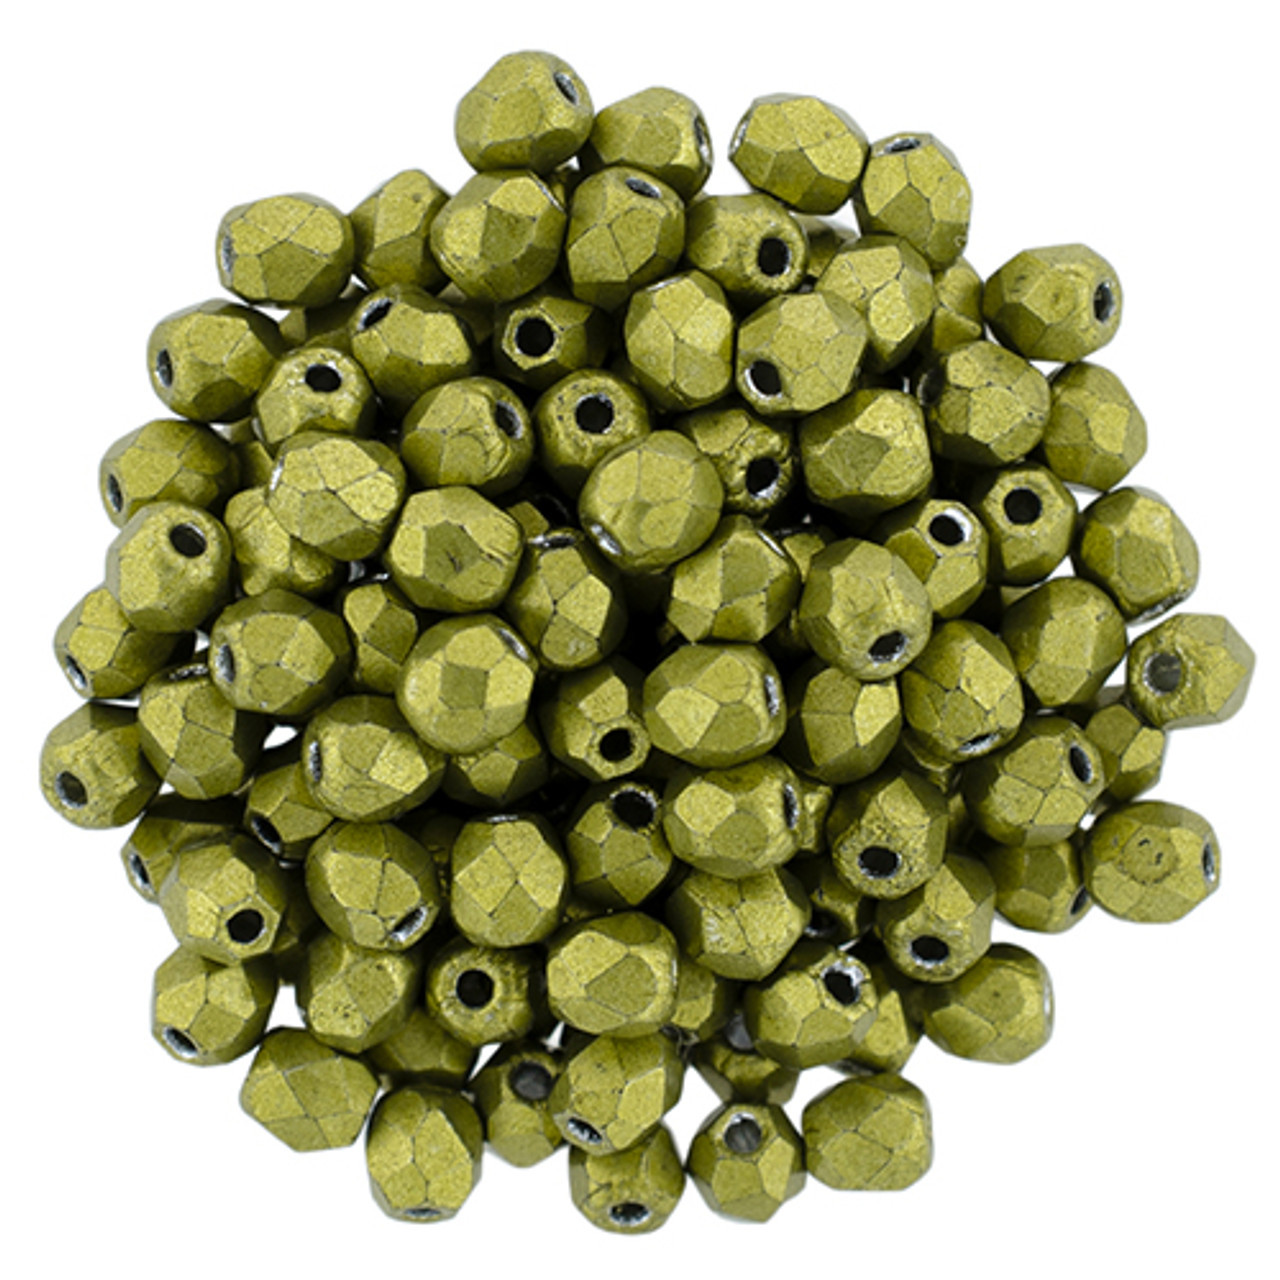 2mm 3mm 4mm Matellic Charms Czech Glass Beads for Jewelry Making